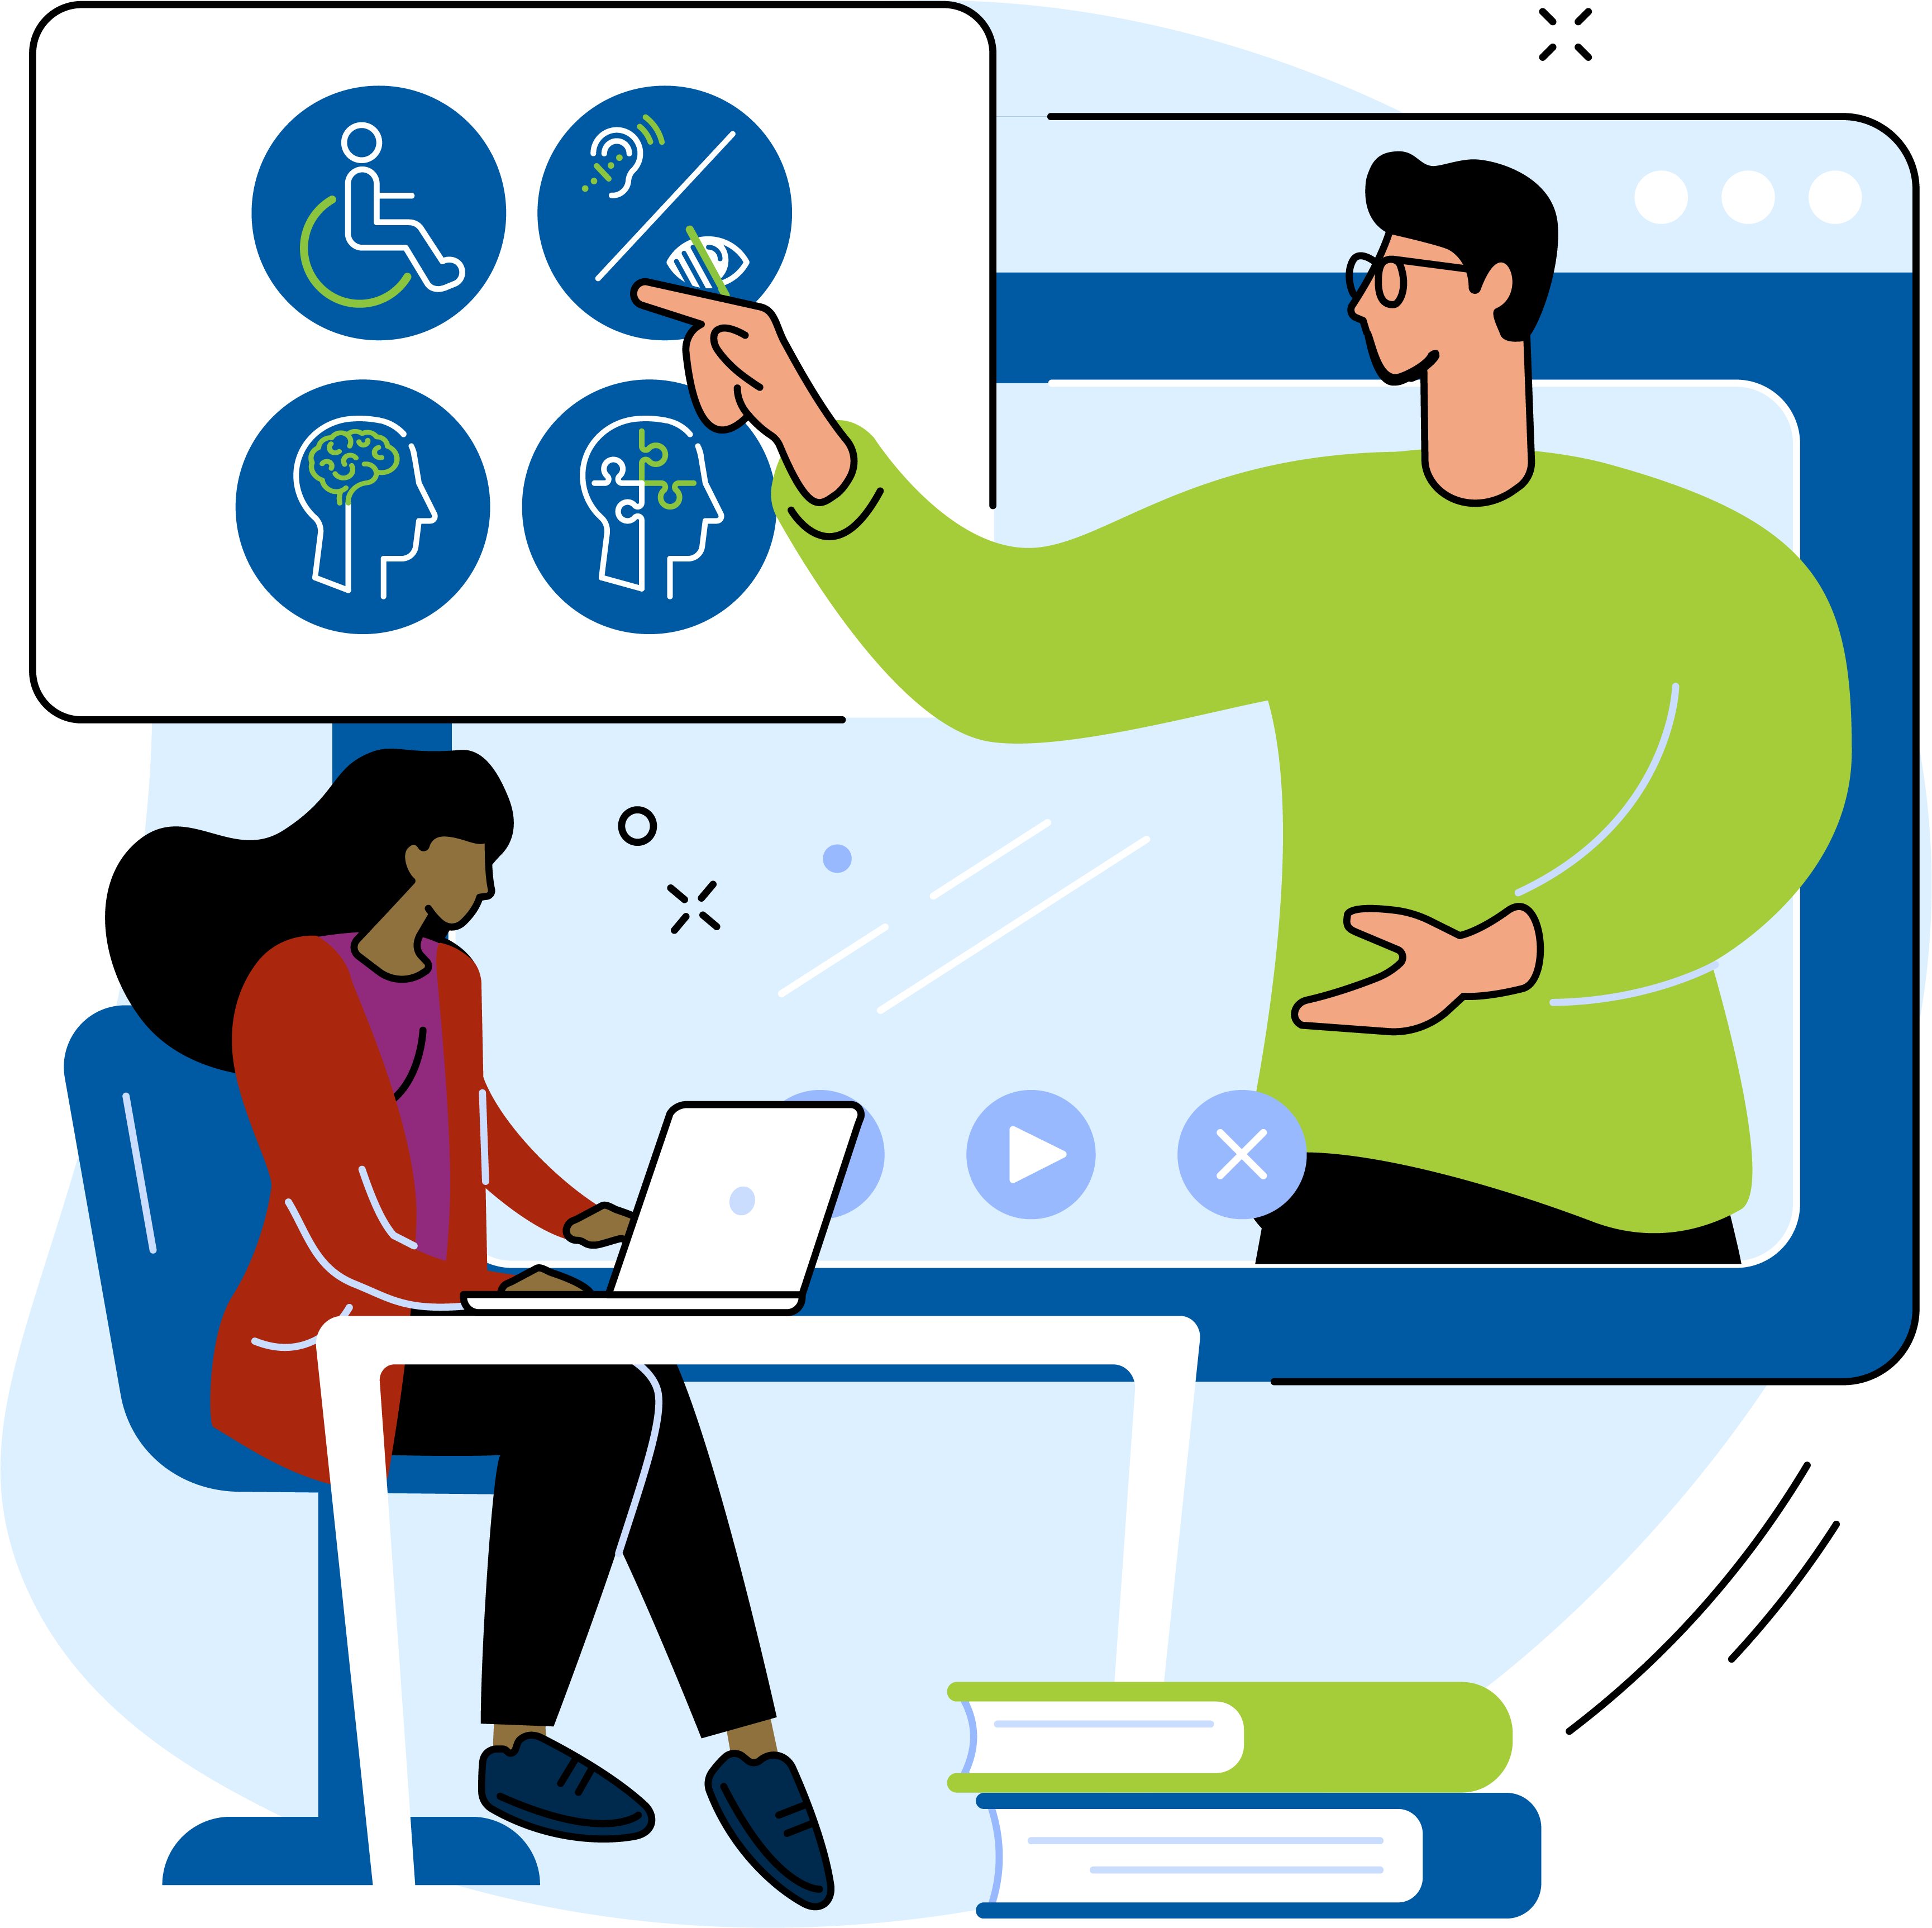 Illustration of a woman seated with her laptop, while a man points to four icons showing the different disability types